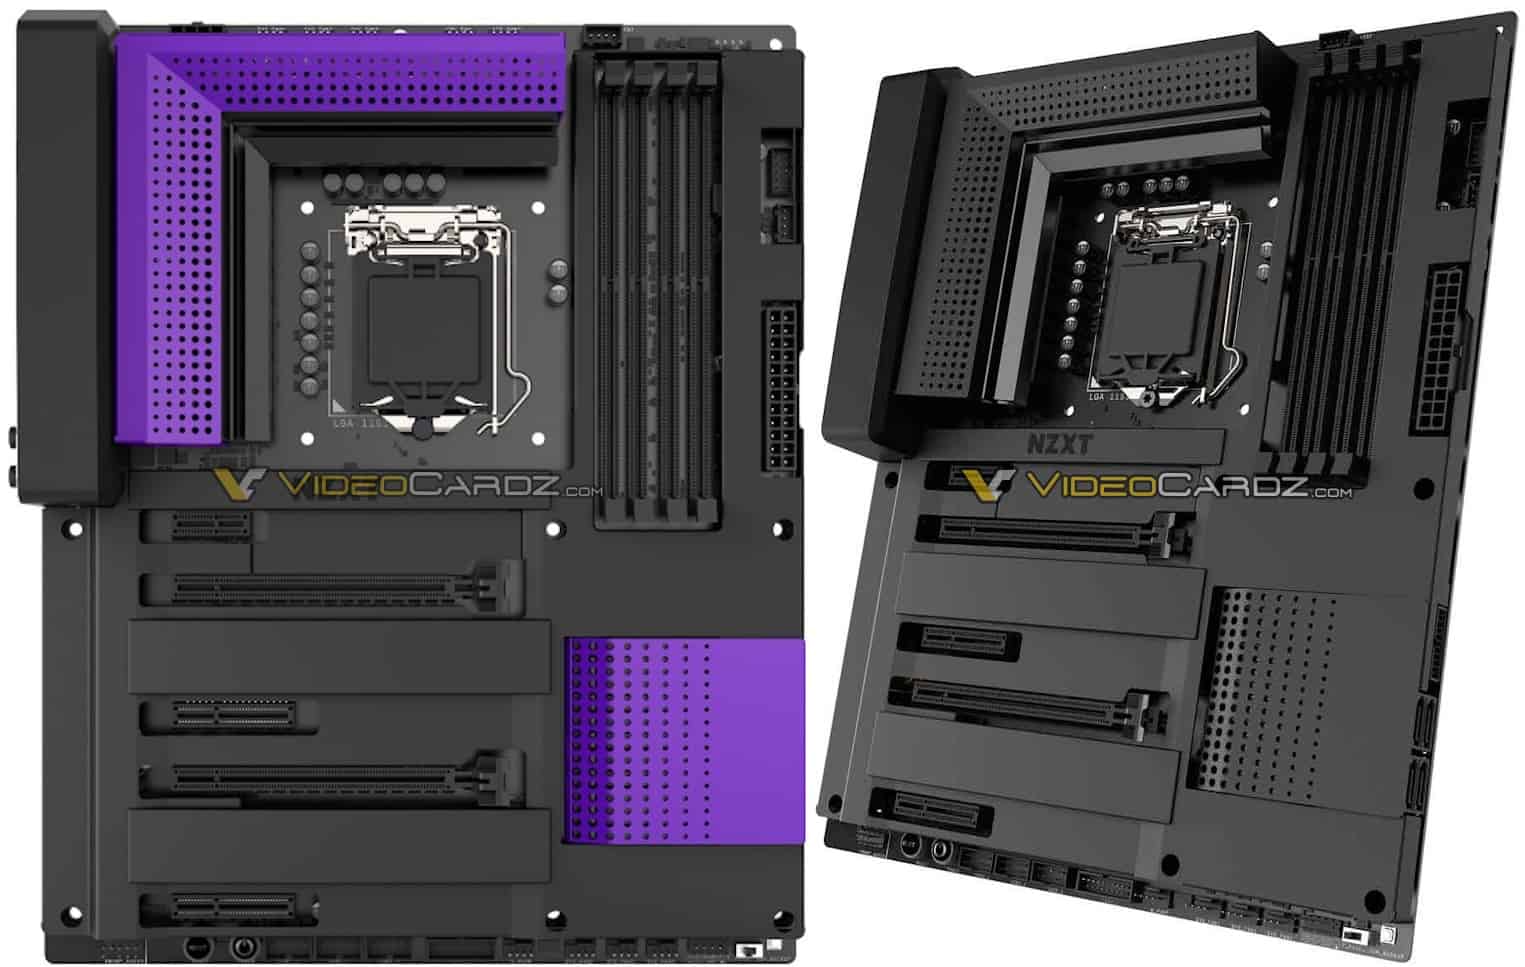 NZXT N7 Z370 1 - NZXT entra nel mercato delle schede madri con NZXT N7 Z370